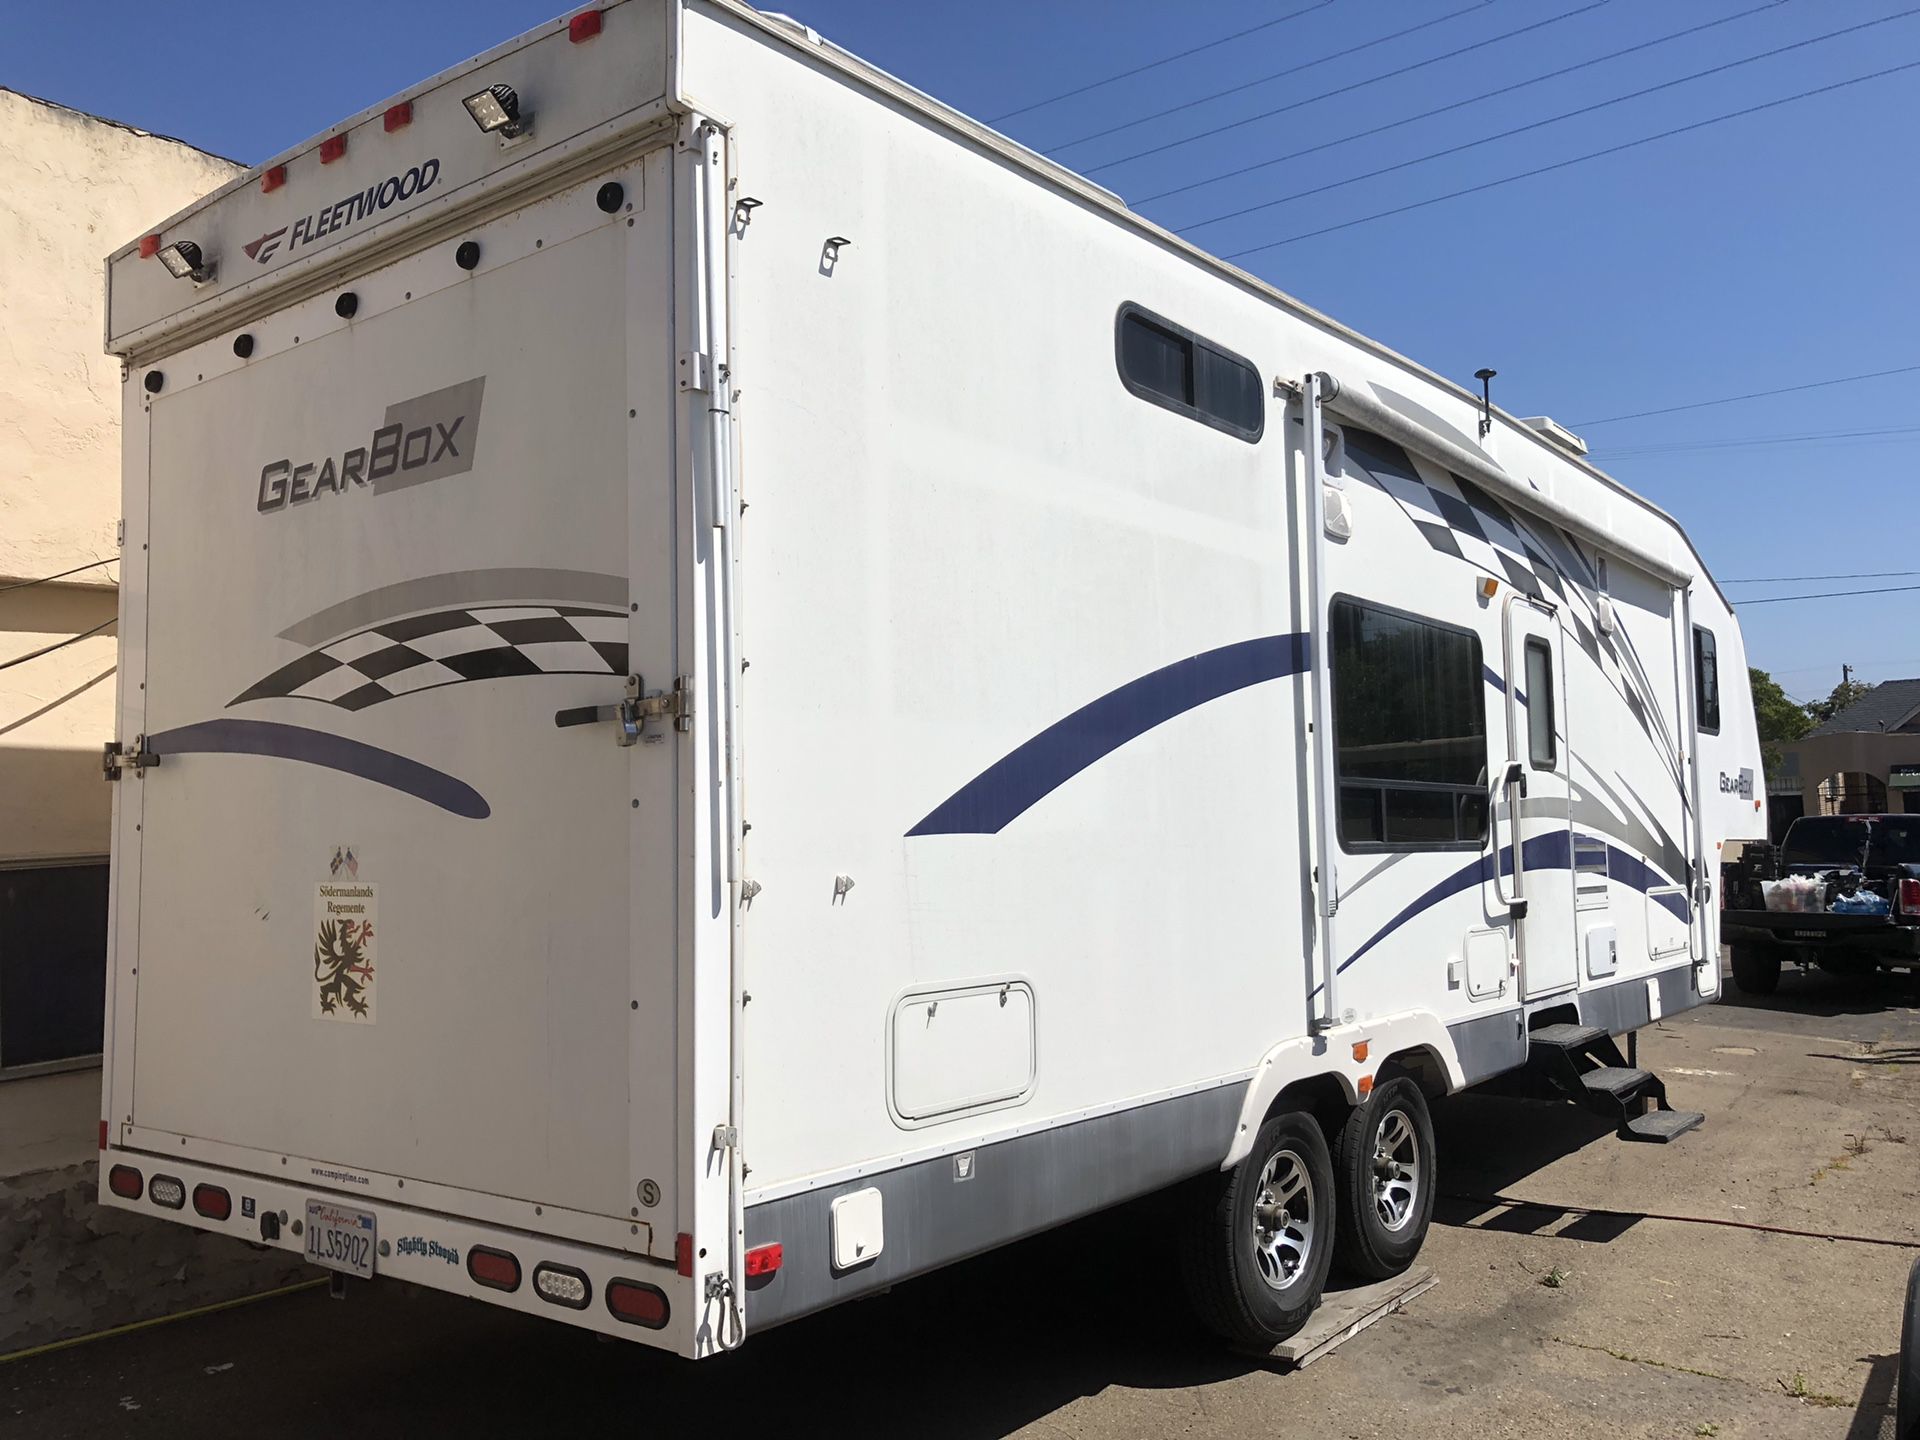 2006 Gearbox 5th Wheel Toy Hauler For